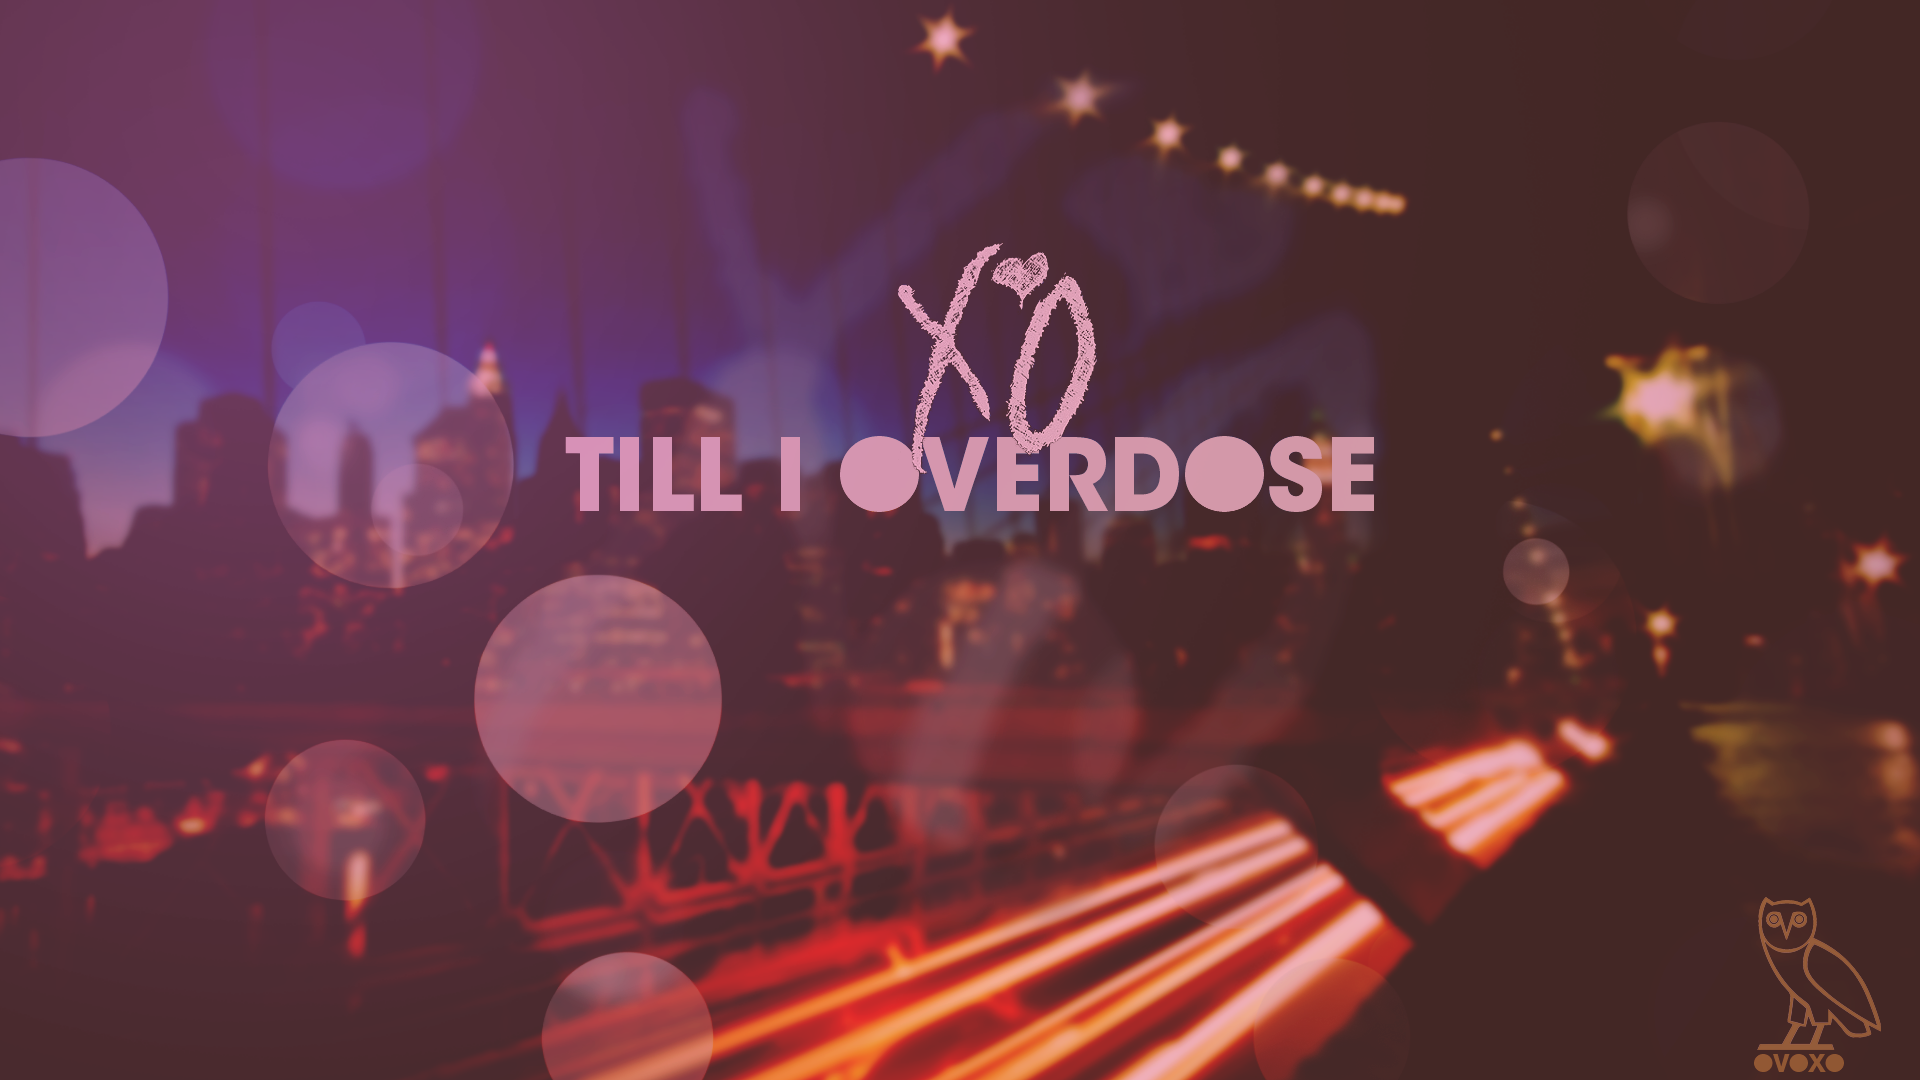 The Weeknd Till I Overdose Xo Rap Wallpapers 1920x1080